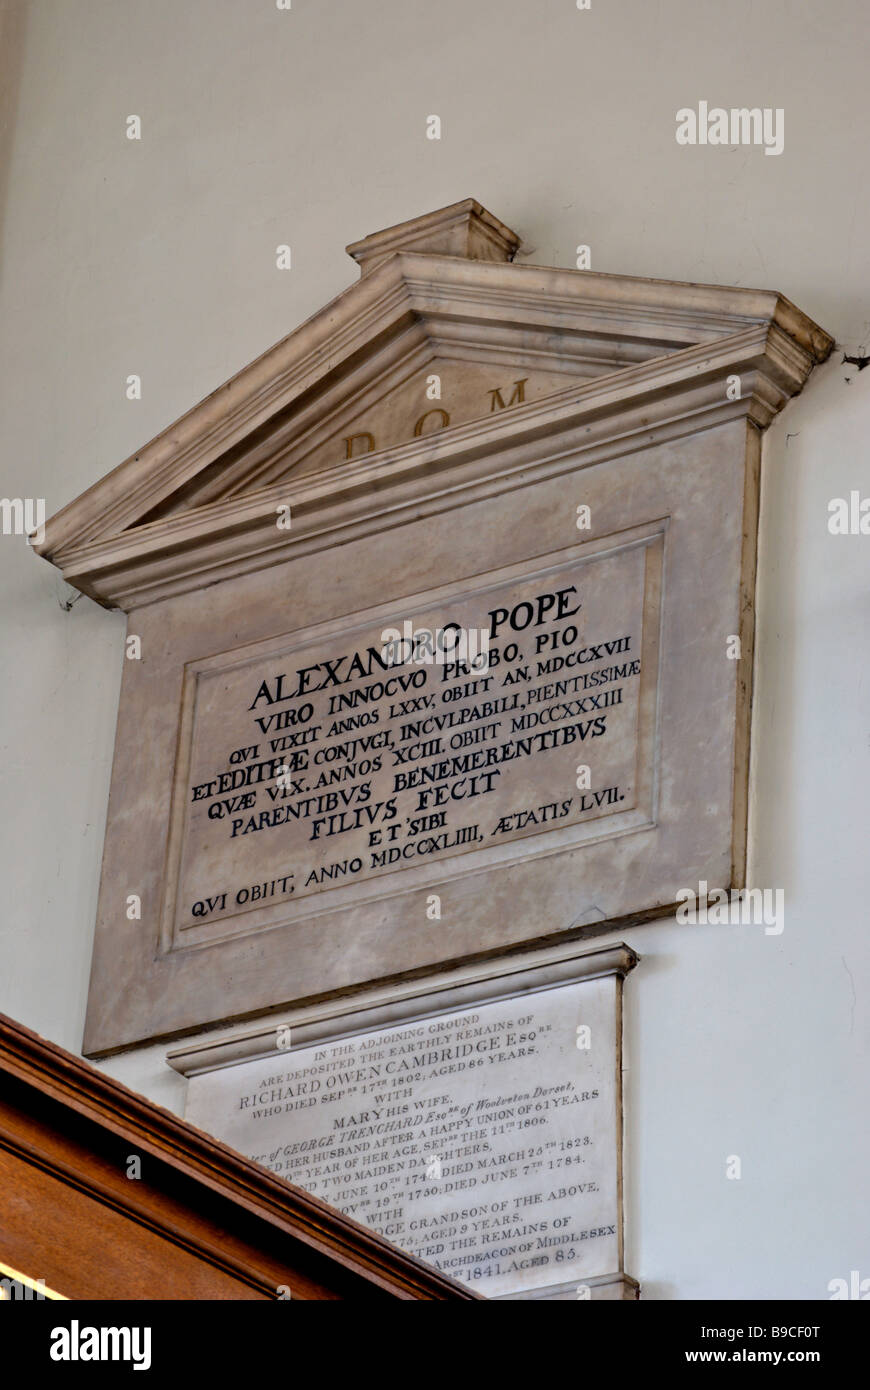 memorial in latin by francis bird to poet and satirist alexander pope, at st mary's church, twickenham, middlesex, england Stock Photo